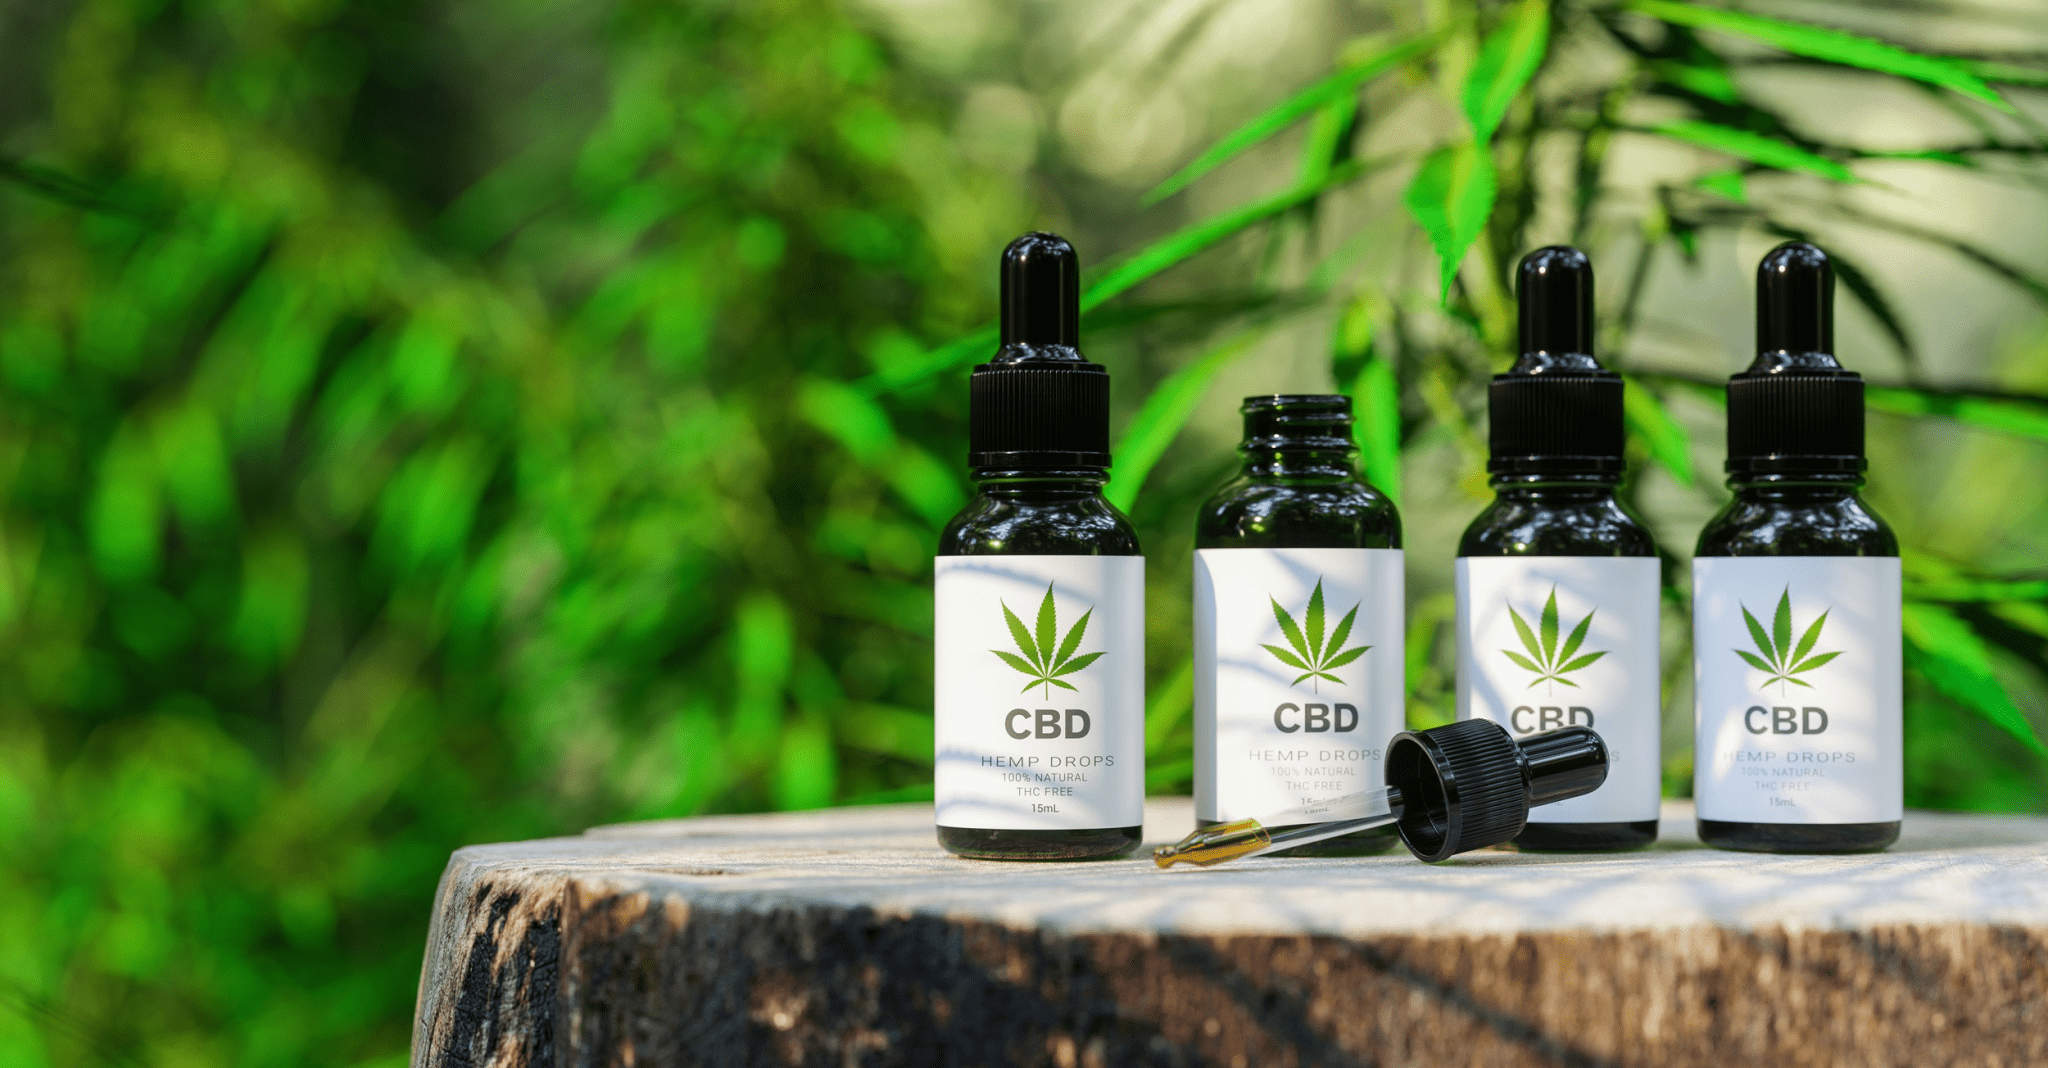 Hemp Oil: A Cannabis Superstar in Its Very Own Right